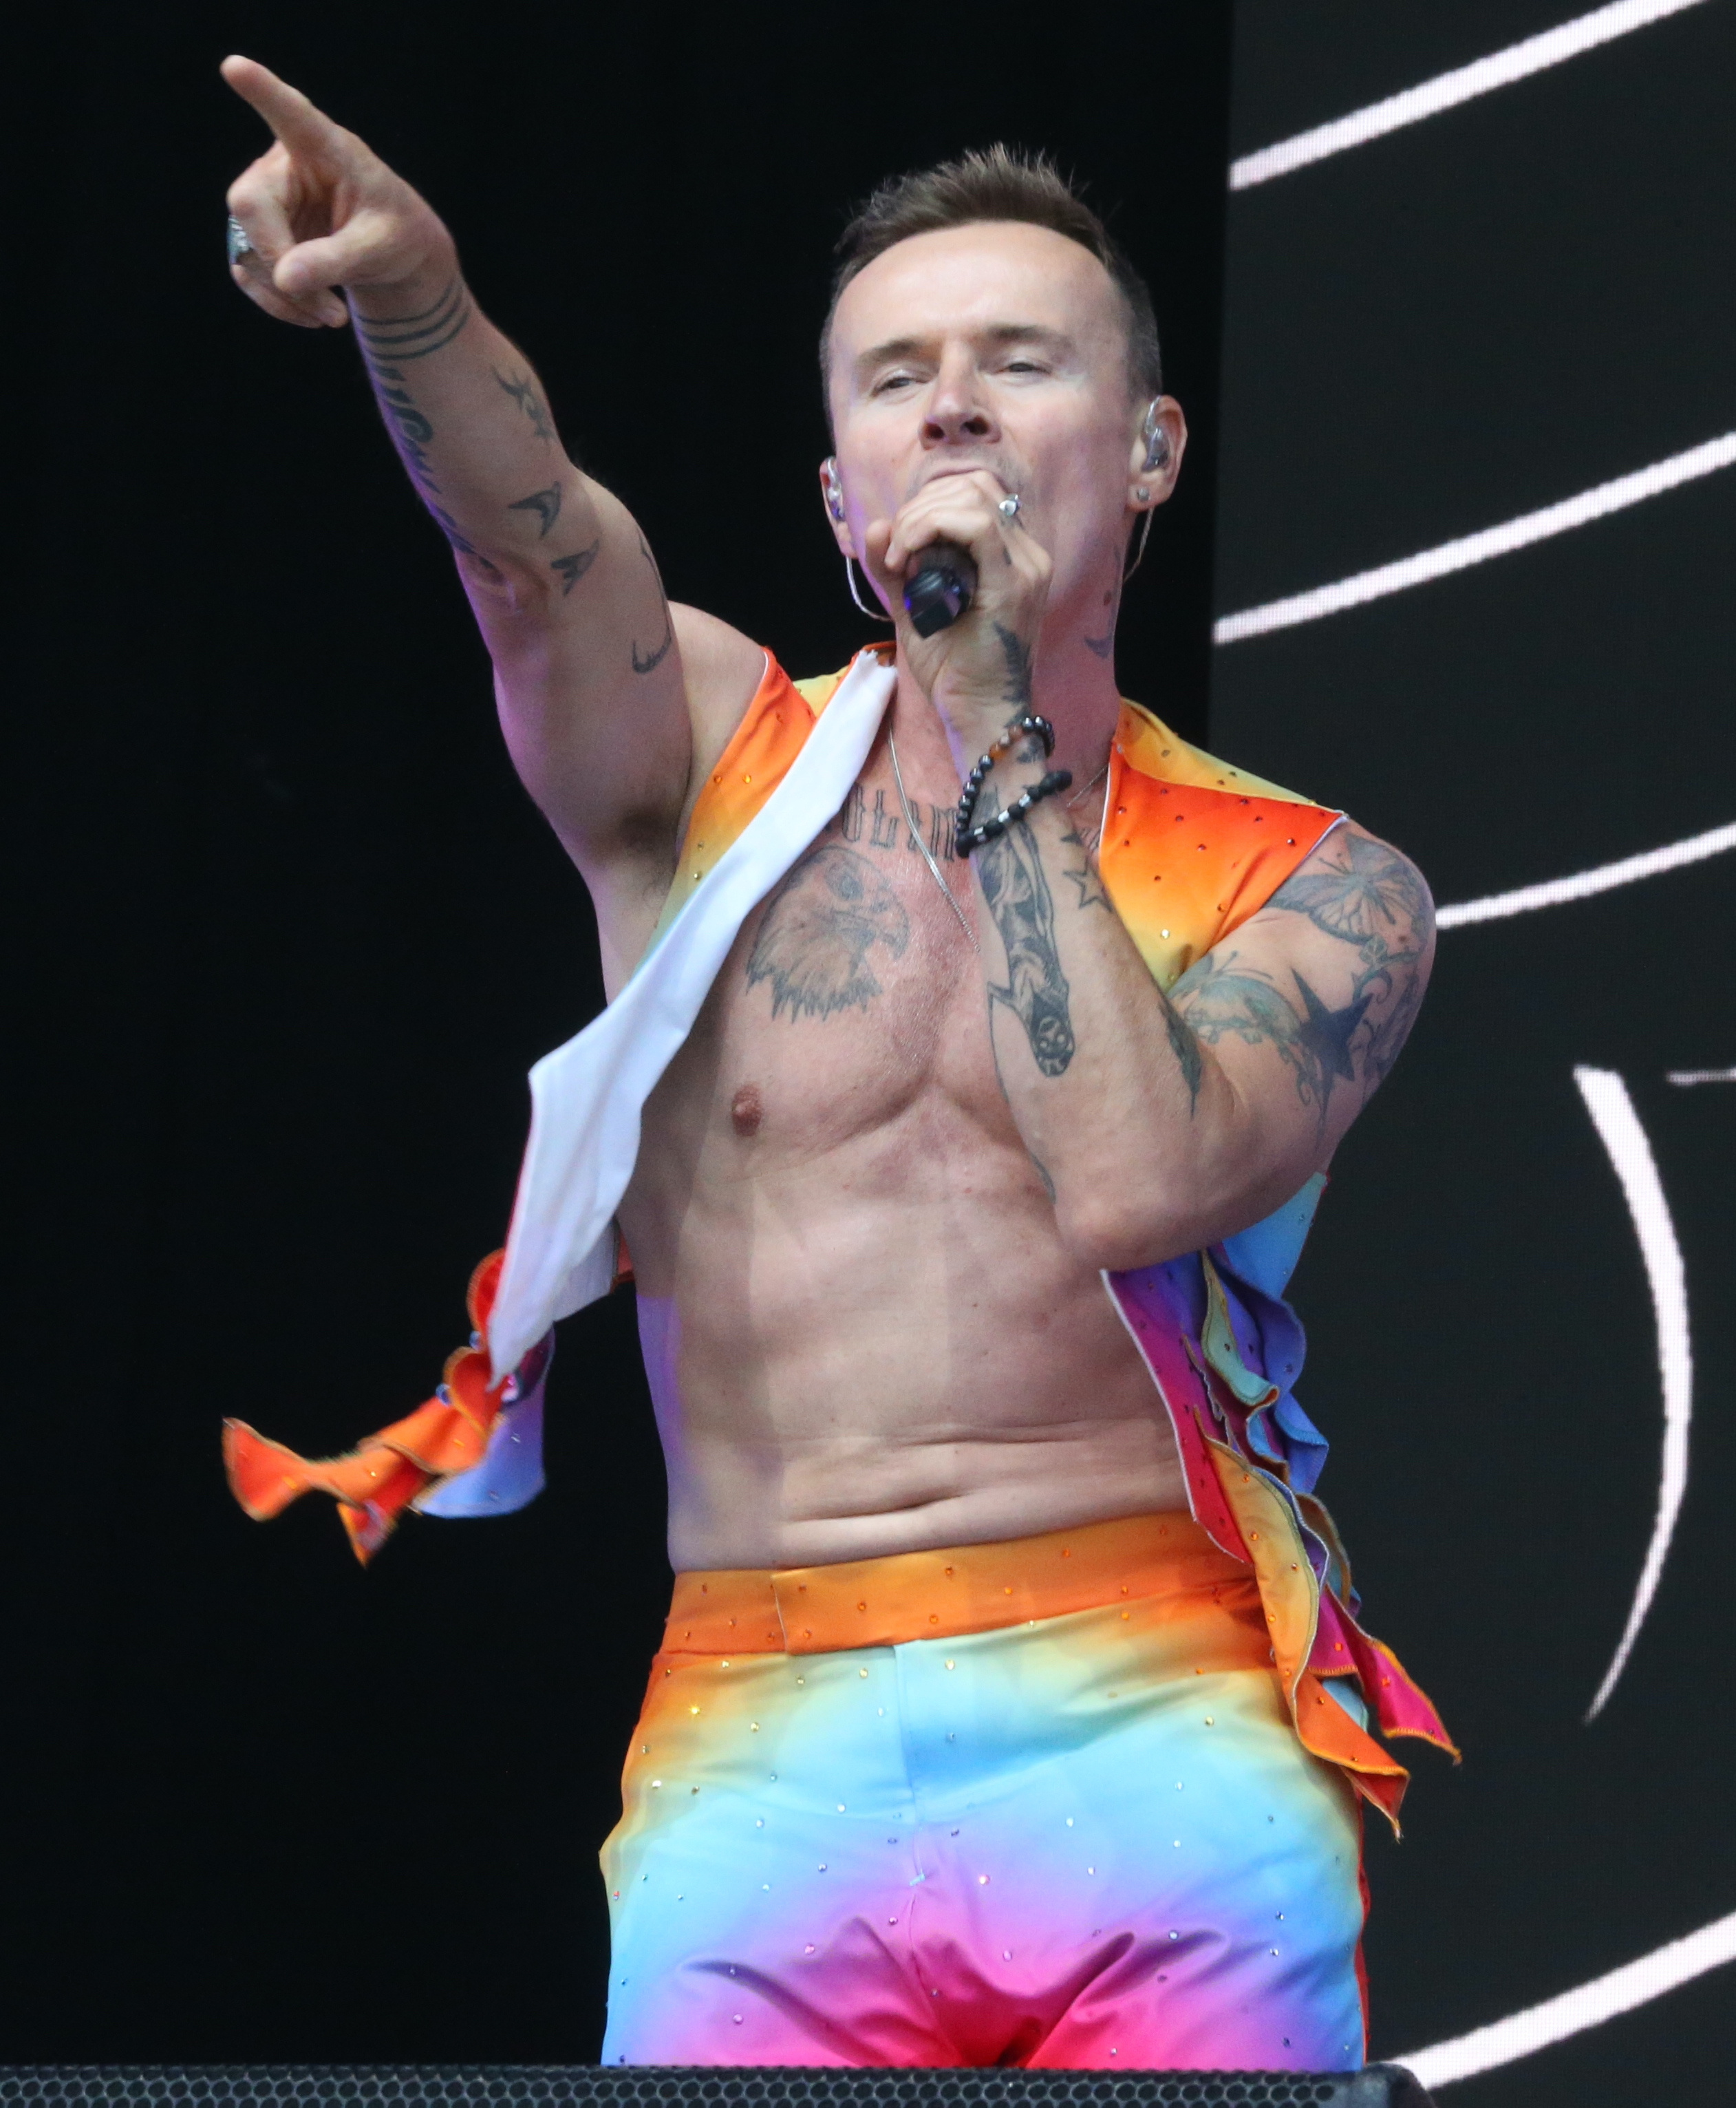 S Club's Jon Lee wore this multi-coloured outfit during a performance at Brighton Pride on Sunday